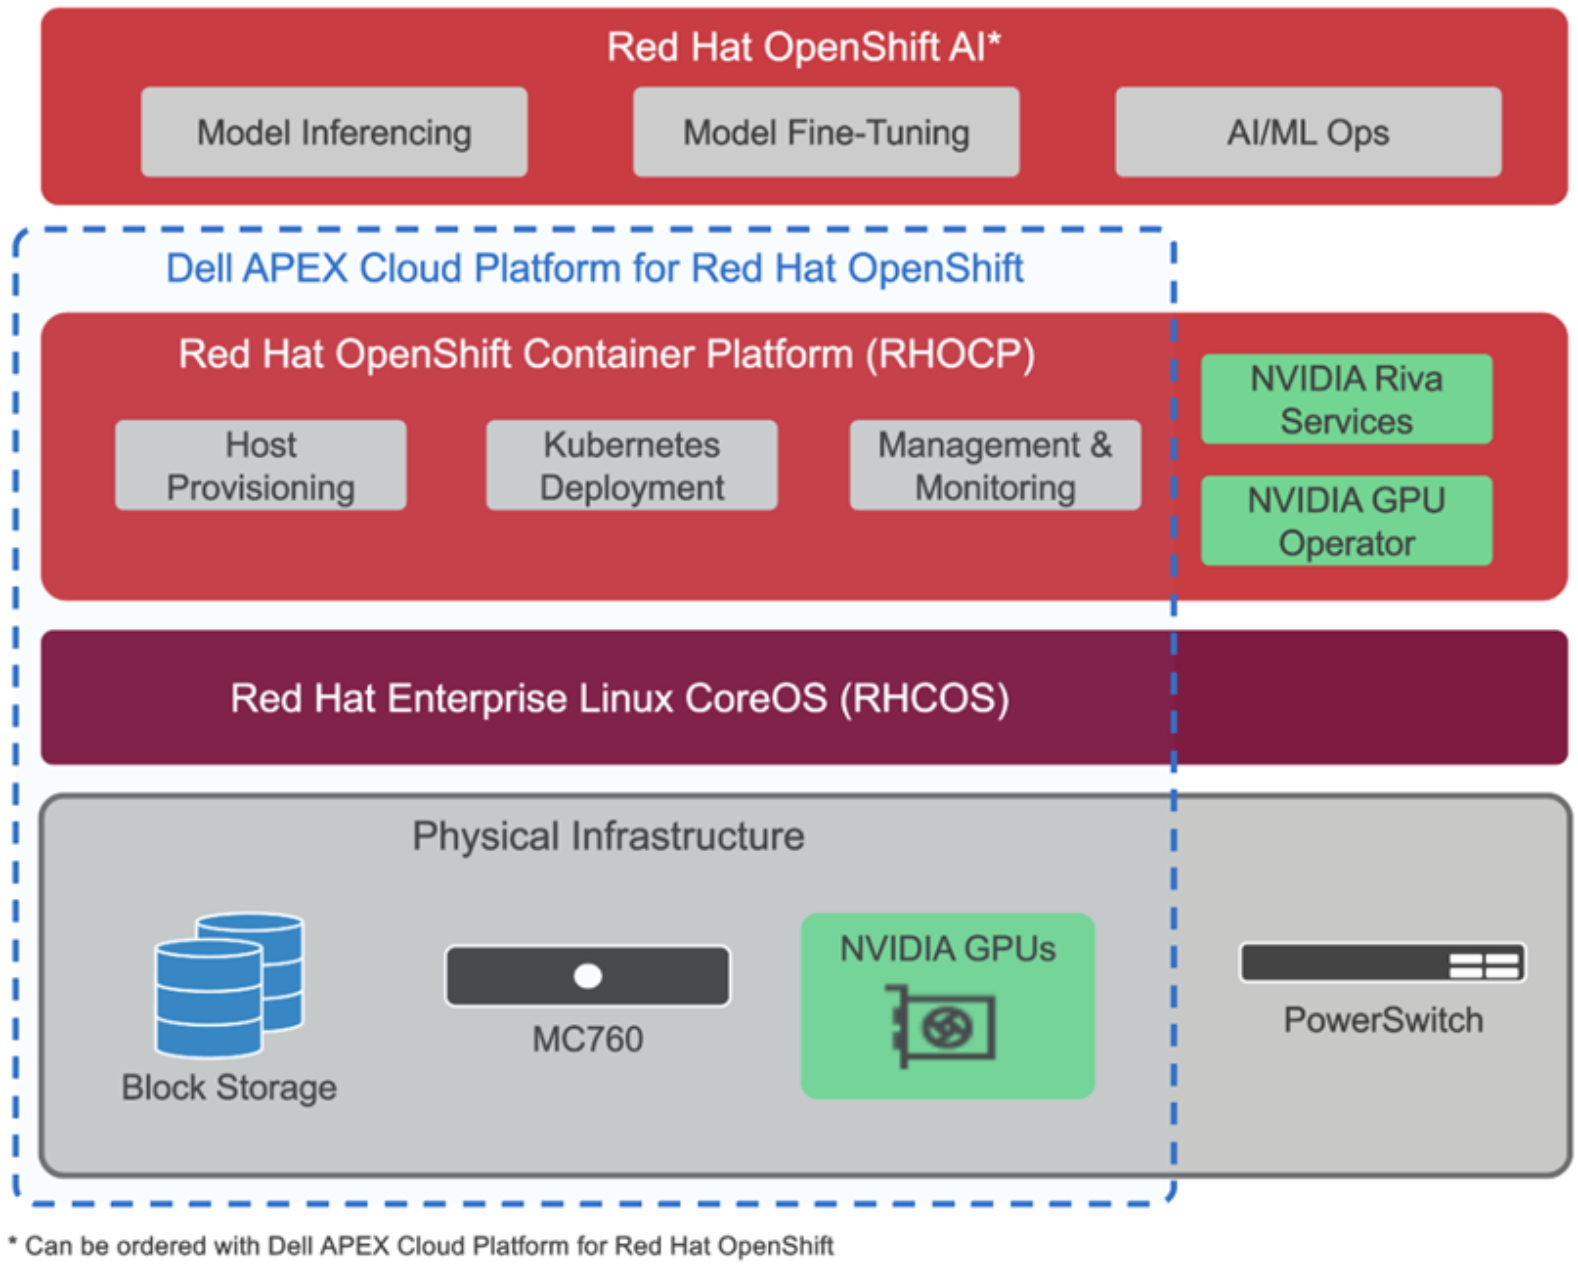 Diagram showing elements comprising the solution in layers, stacked vertically. From bottom to top: physical infrastructure, Red Hat Enterprise Linux, Red Hat OpenShift, and Red Hat OpenShift AI.